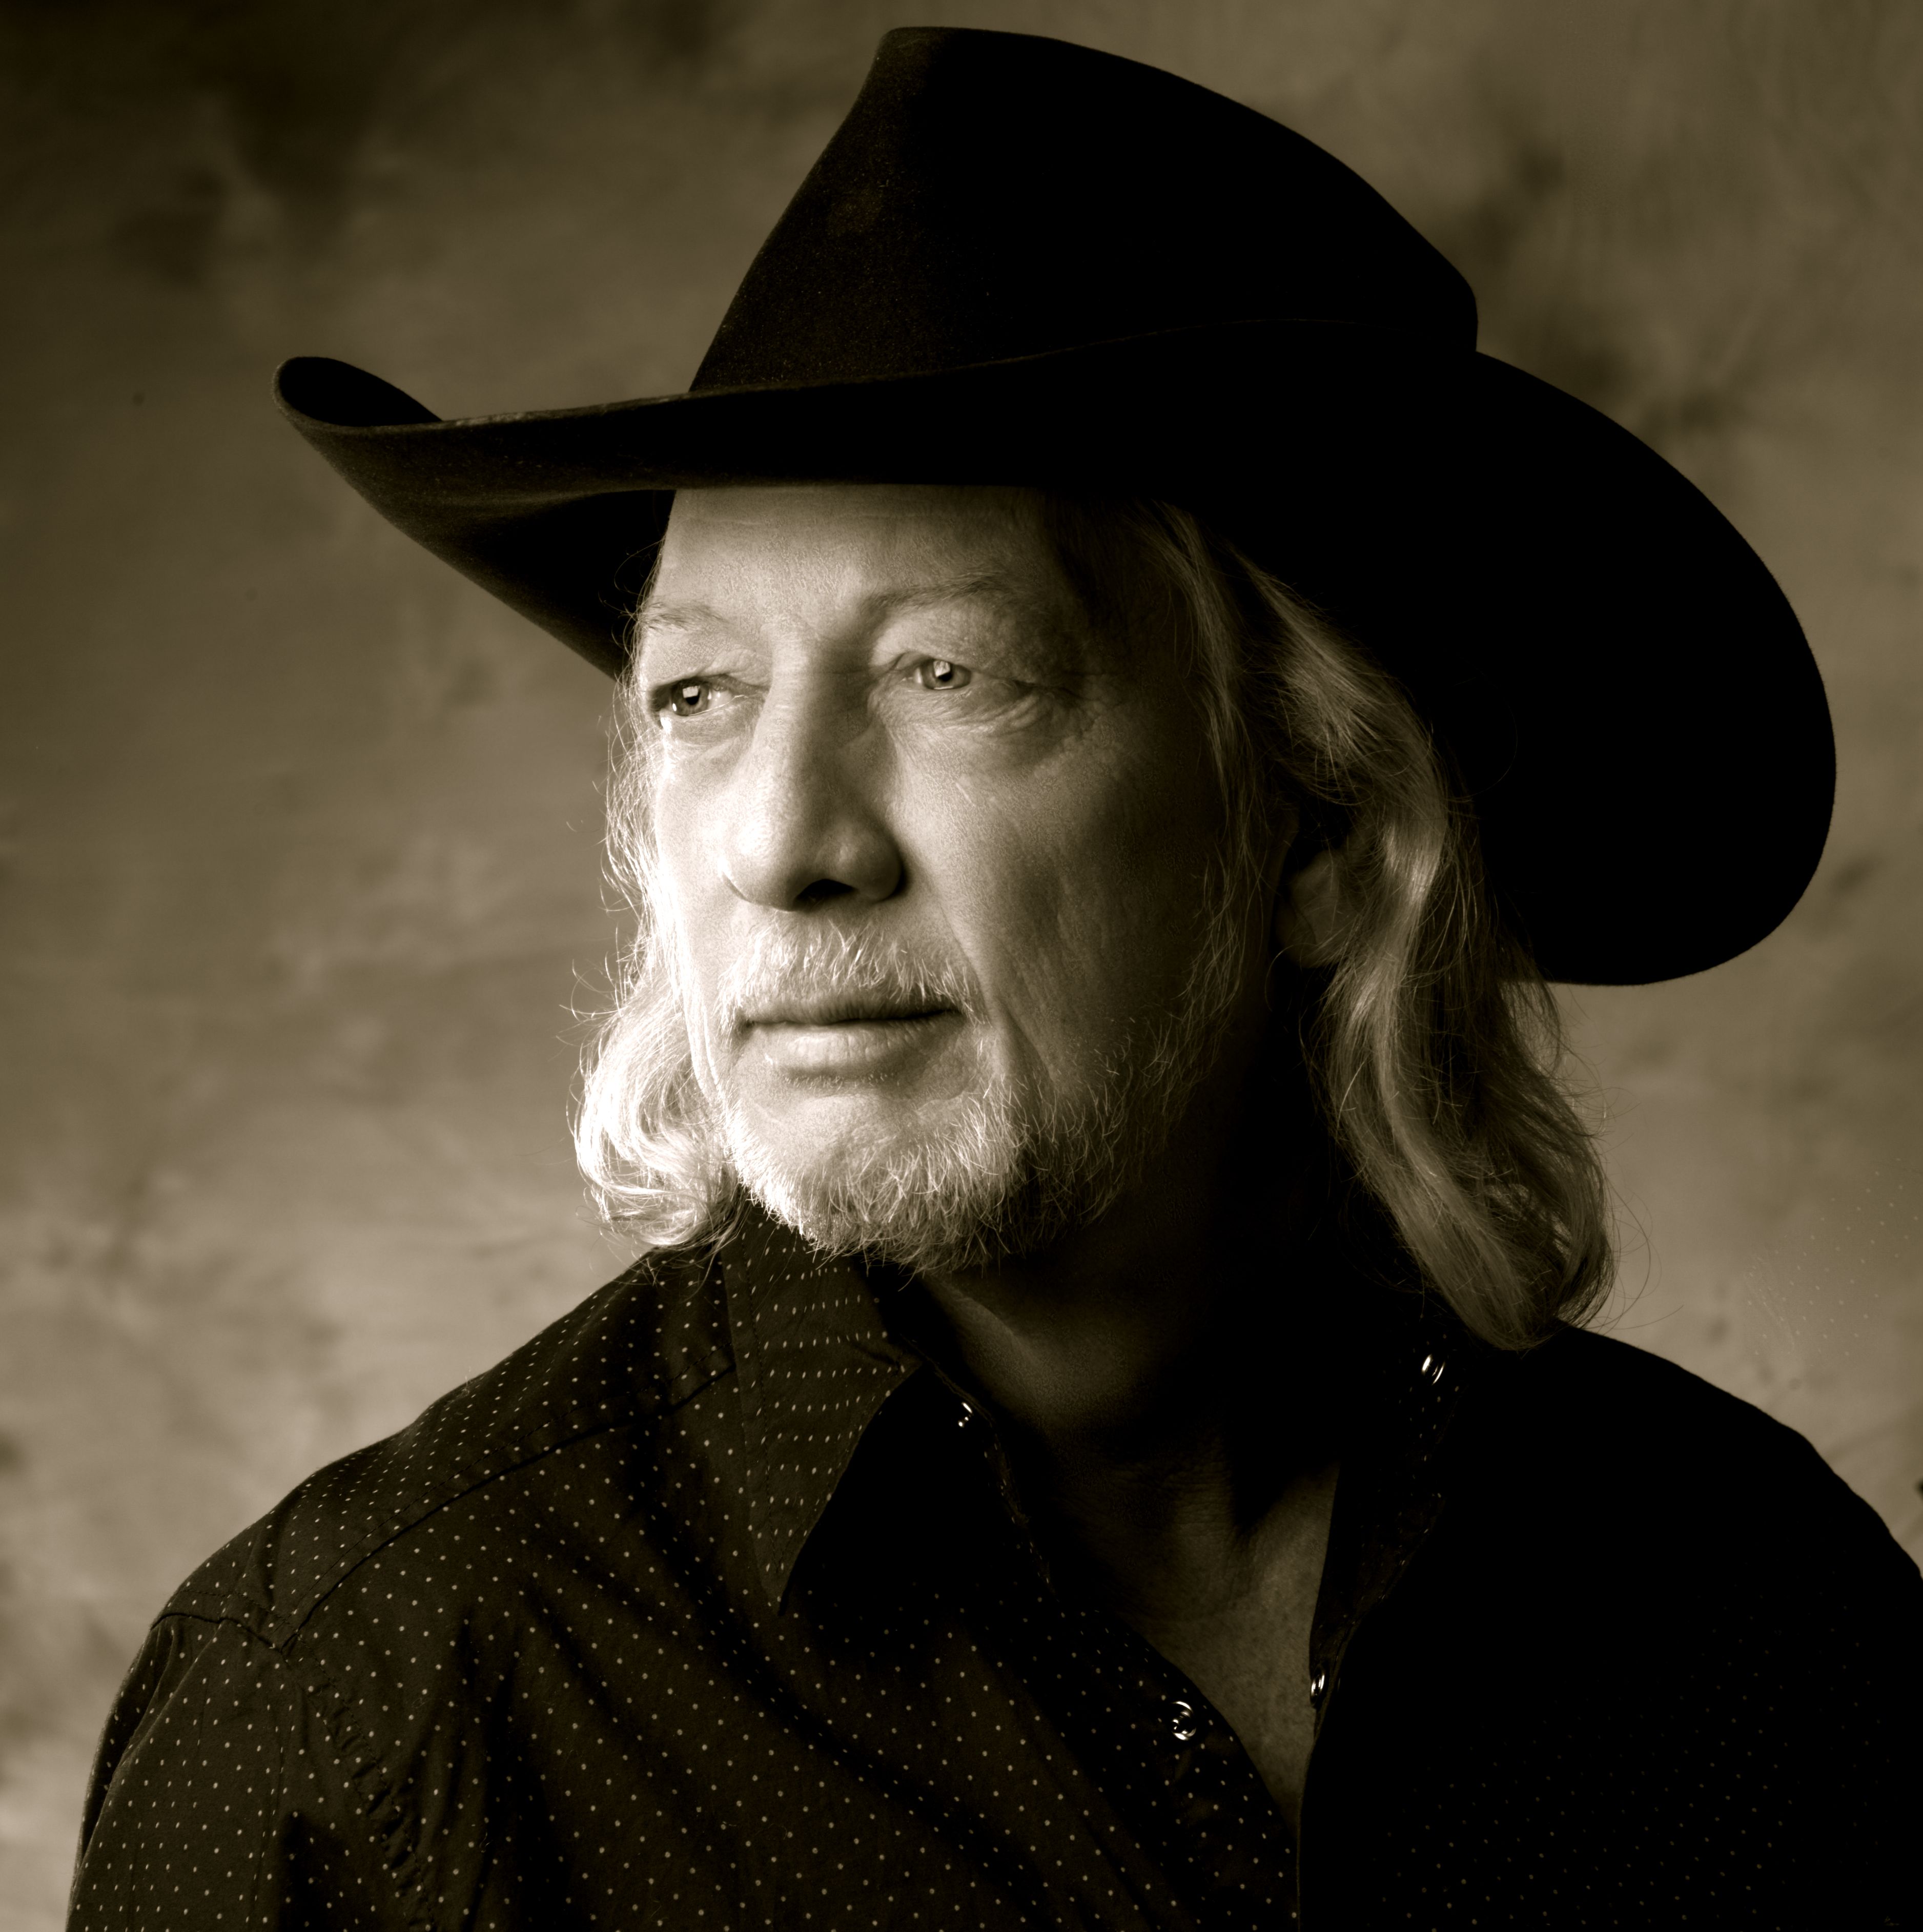 John Anderson Announces Upcoming North American Tour Dates